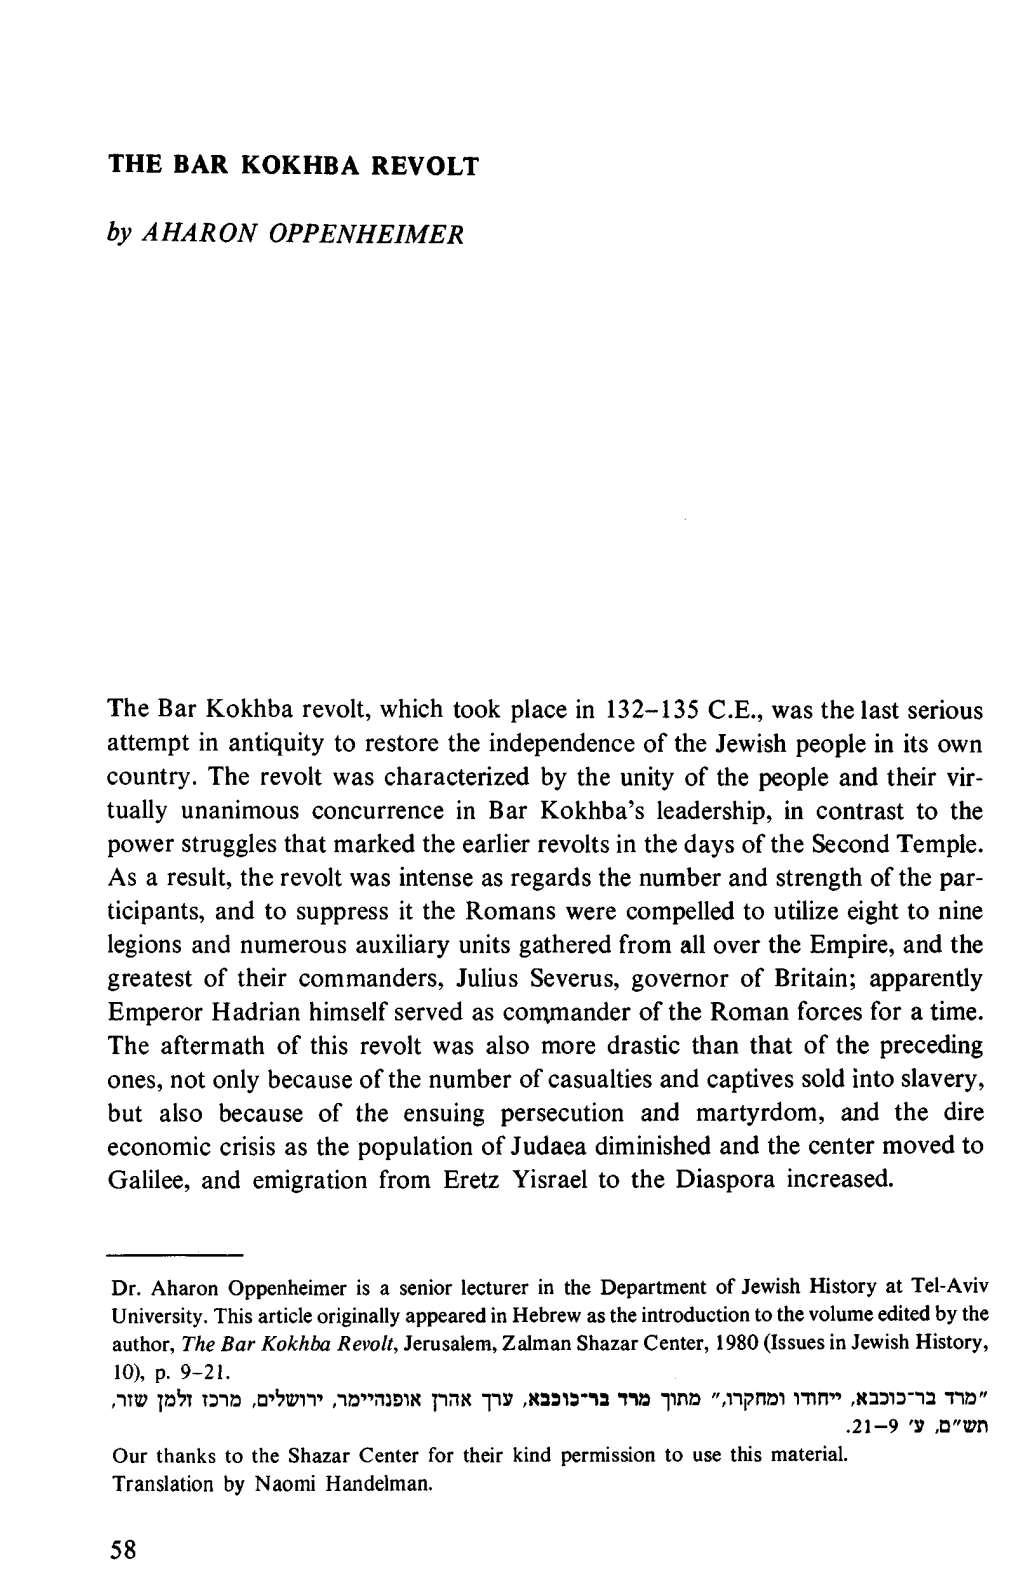 By AHARON OPPENHEIMER the Bar Kokhba Revolt, Which Took Place in 132-135 C.E., Was the Last Serious Attempt in Antiquity to Rest